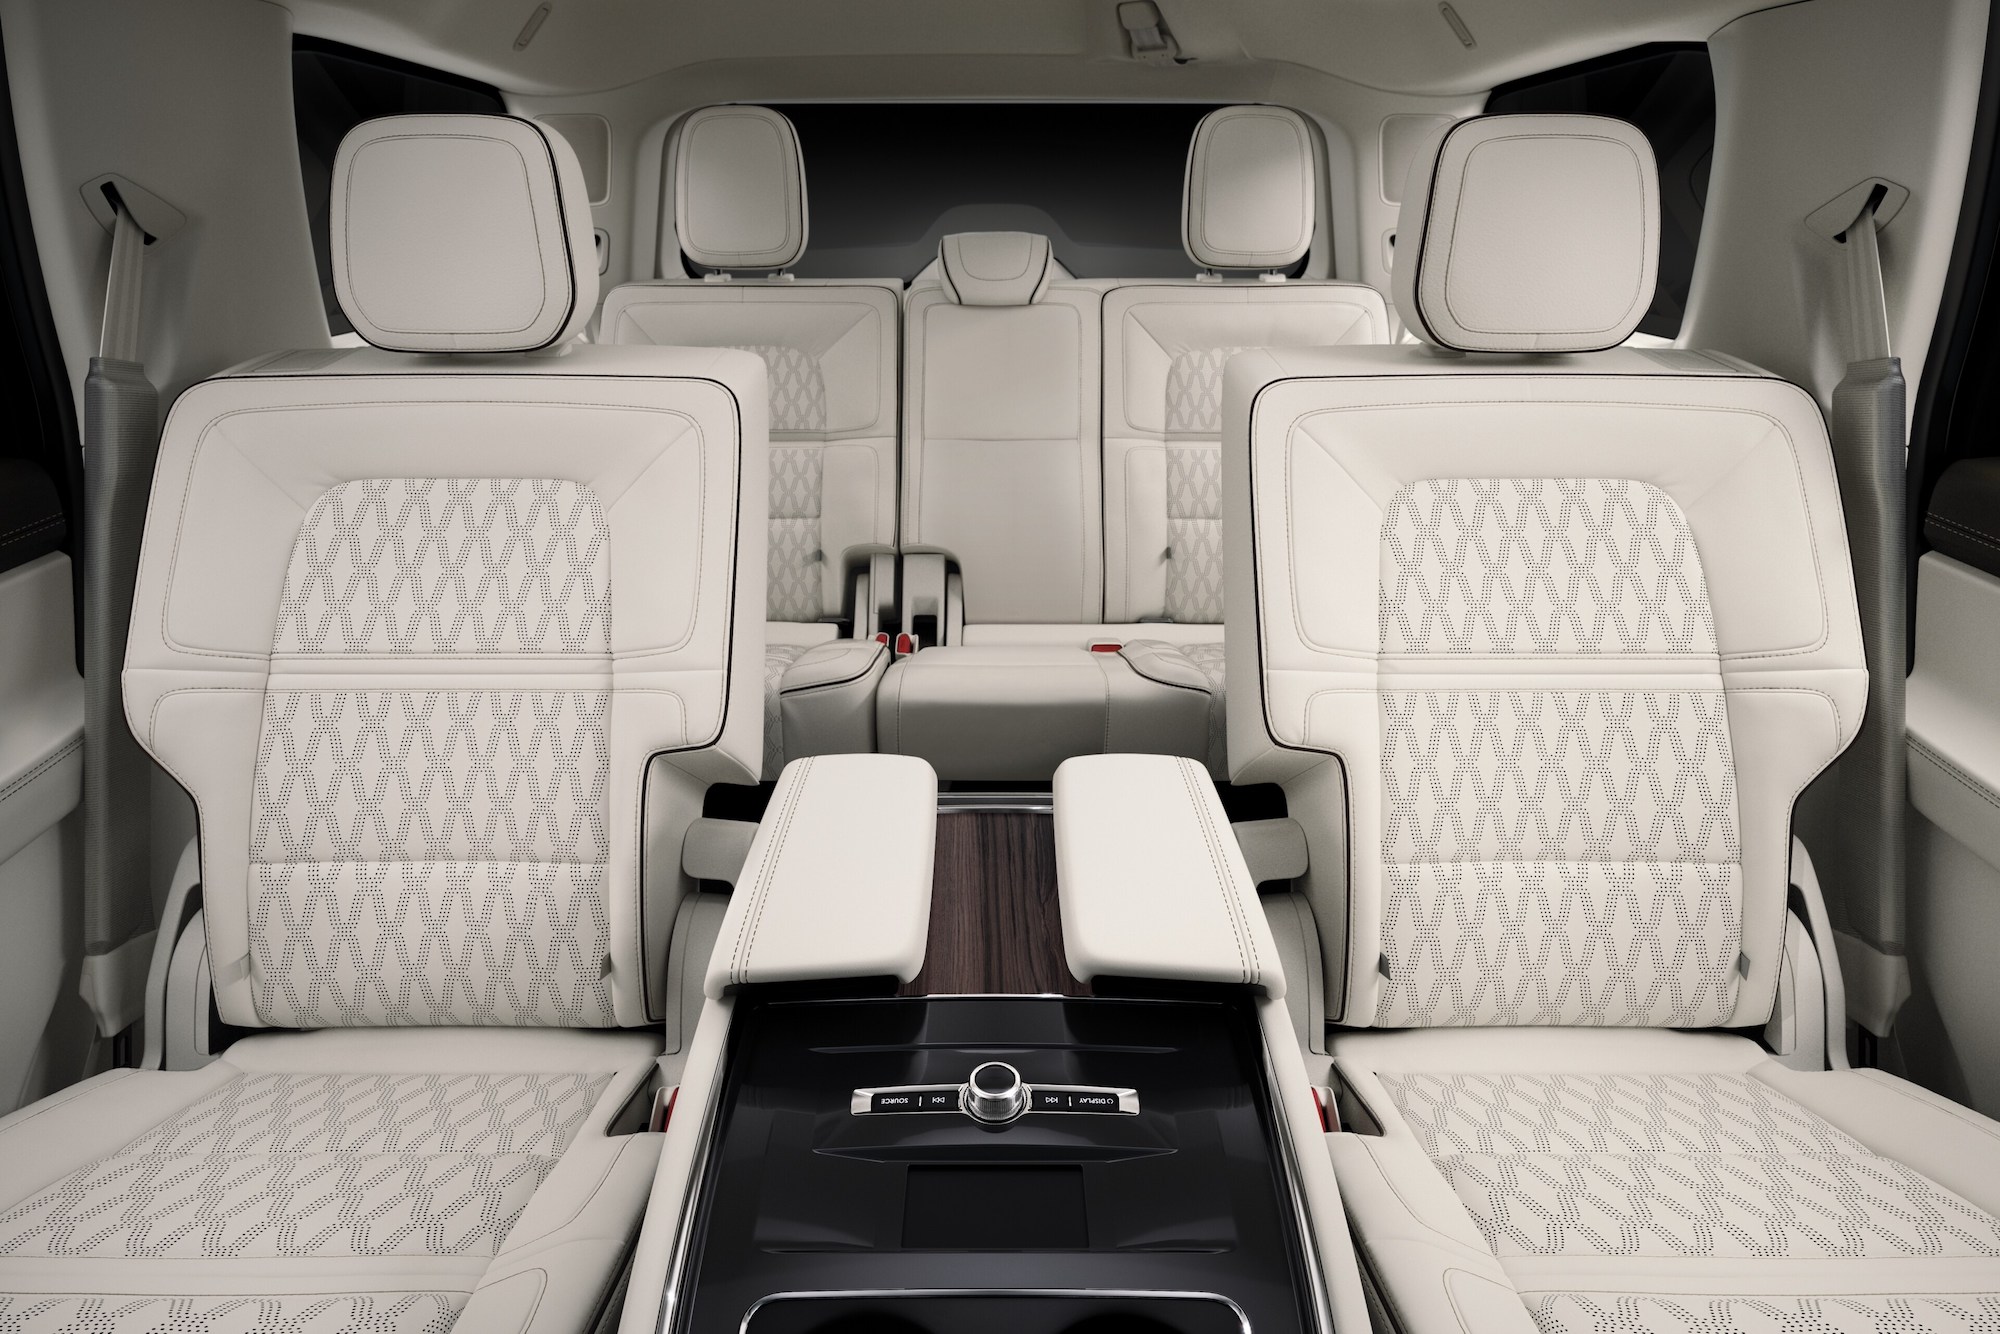 A 2021 Lincoln Navigator Black Label SUV's white and gray leather seating with Chalet theming